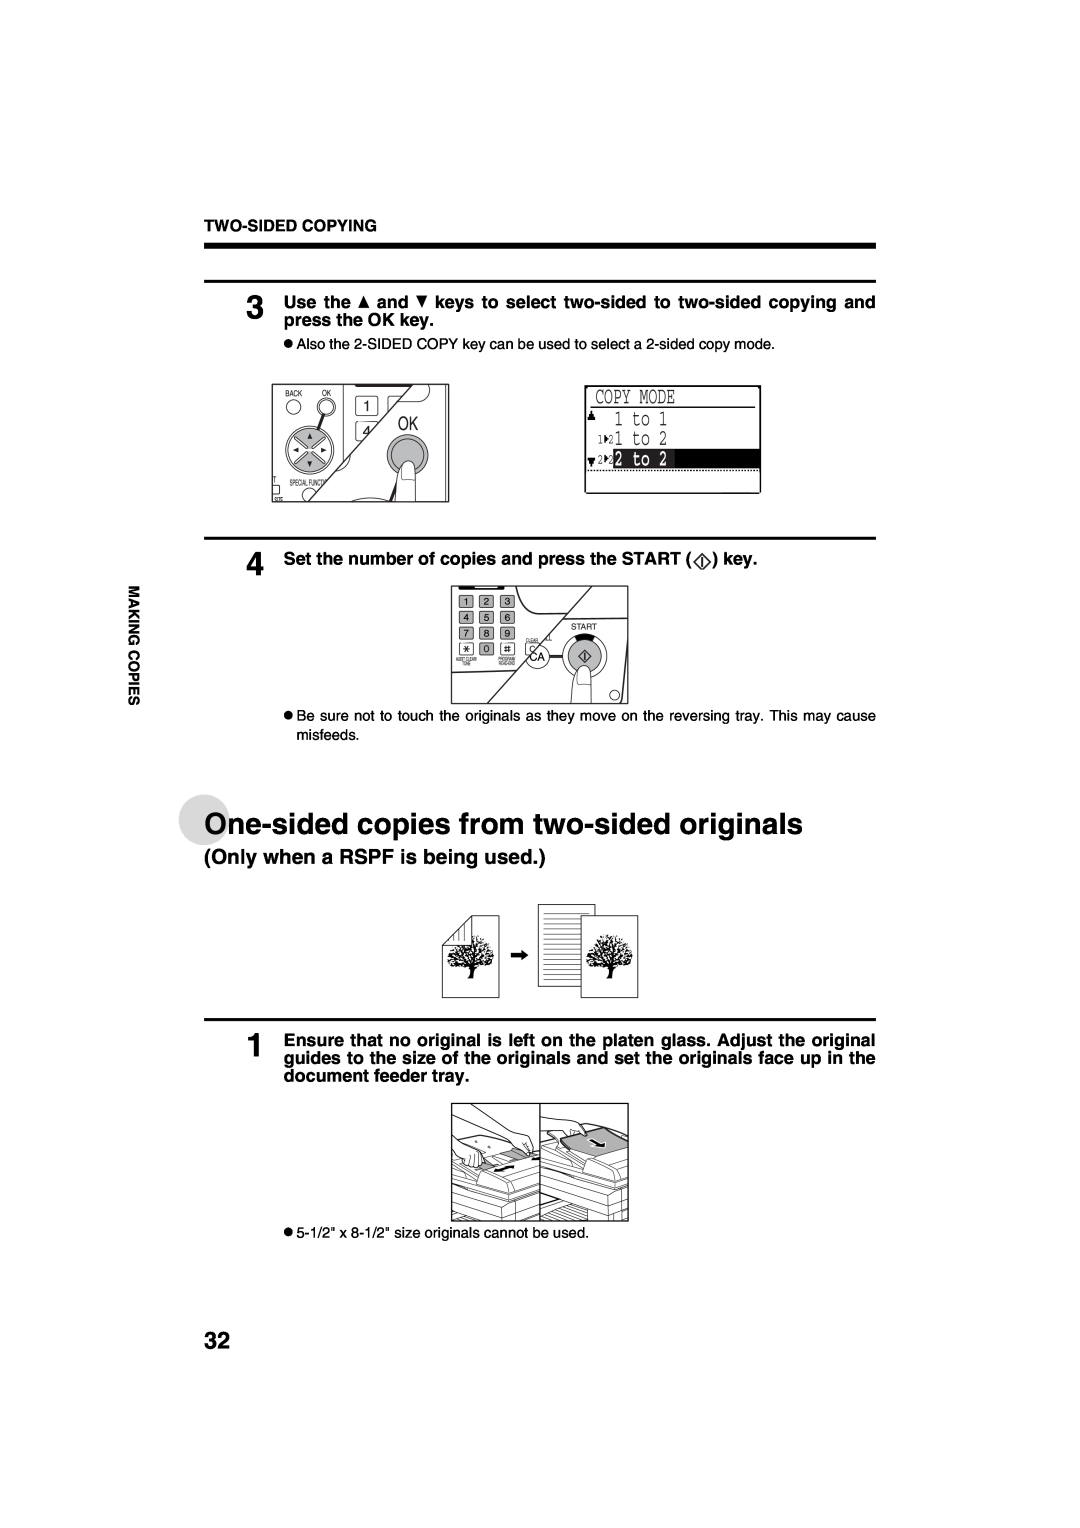 Sharp AR-M208 operation manual One-sided copies from two-sided originals, COPY MODE 1 to 1 21 to, 2 22 to, press the OK key 